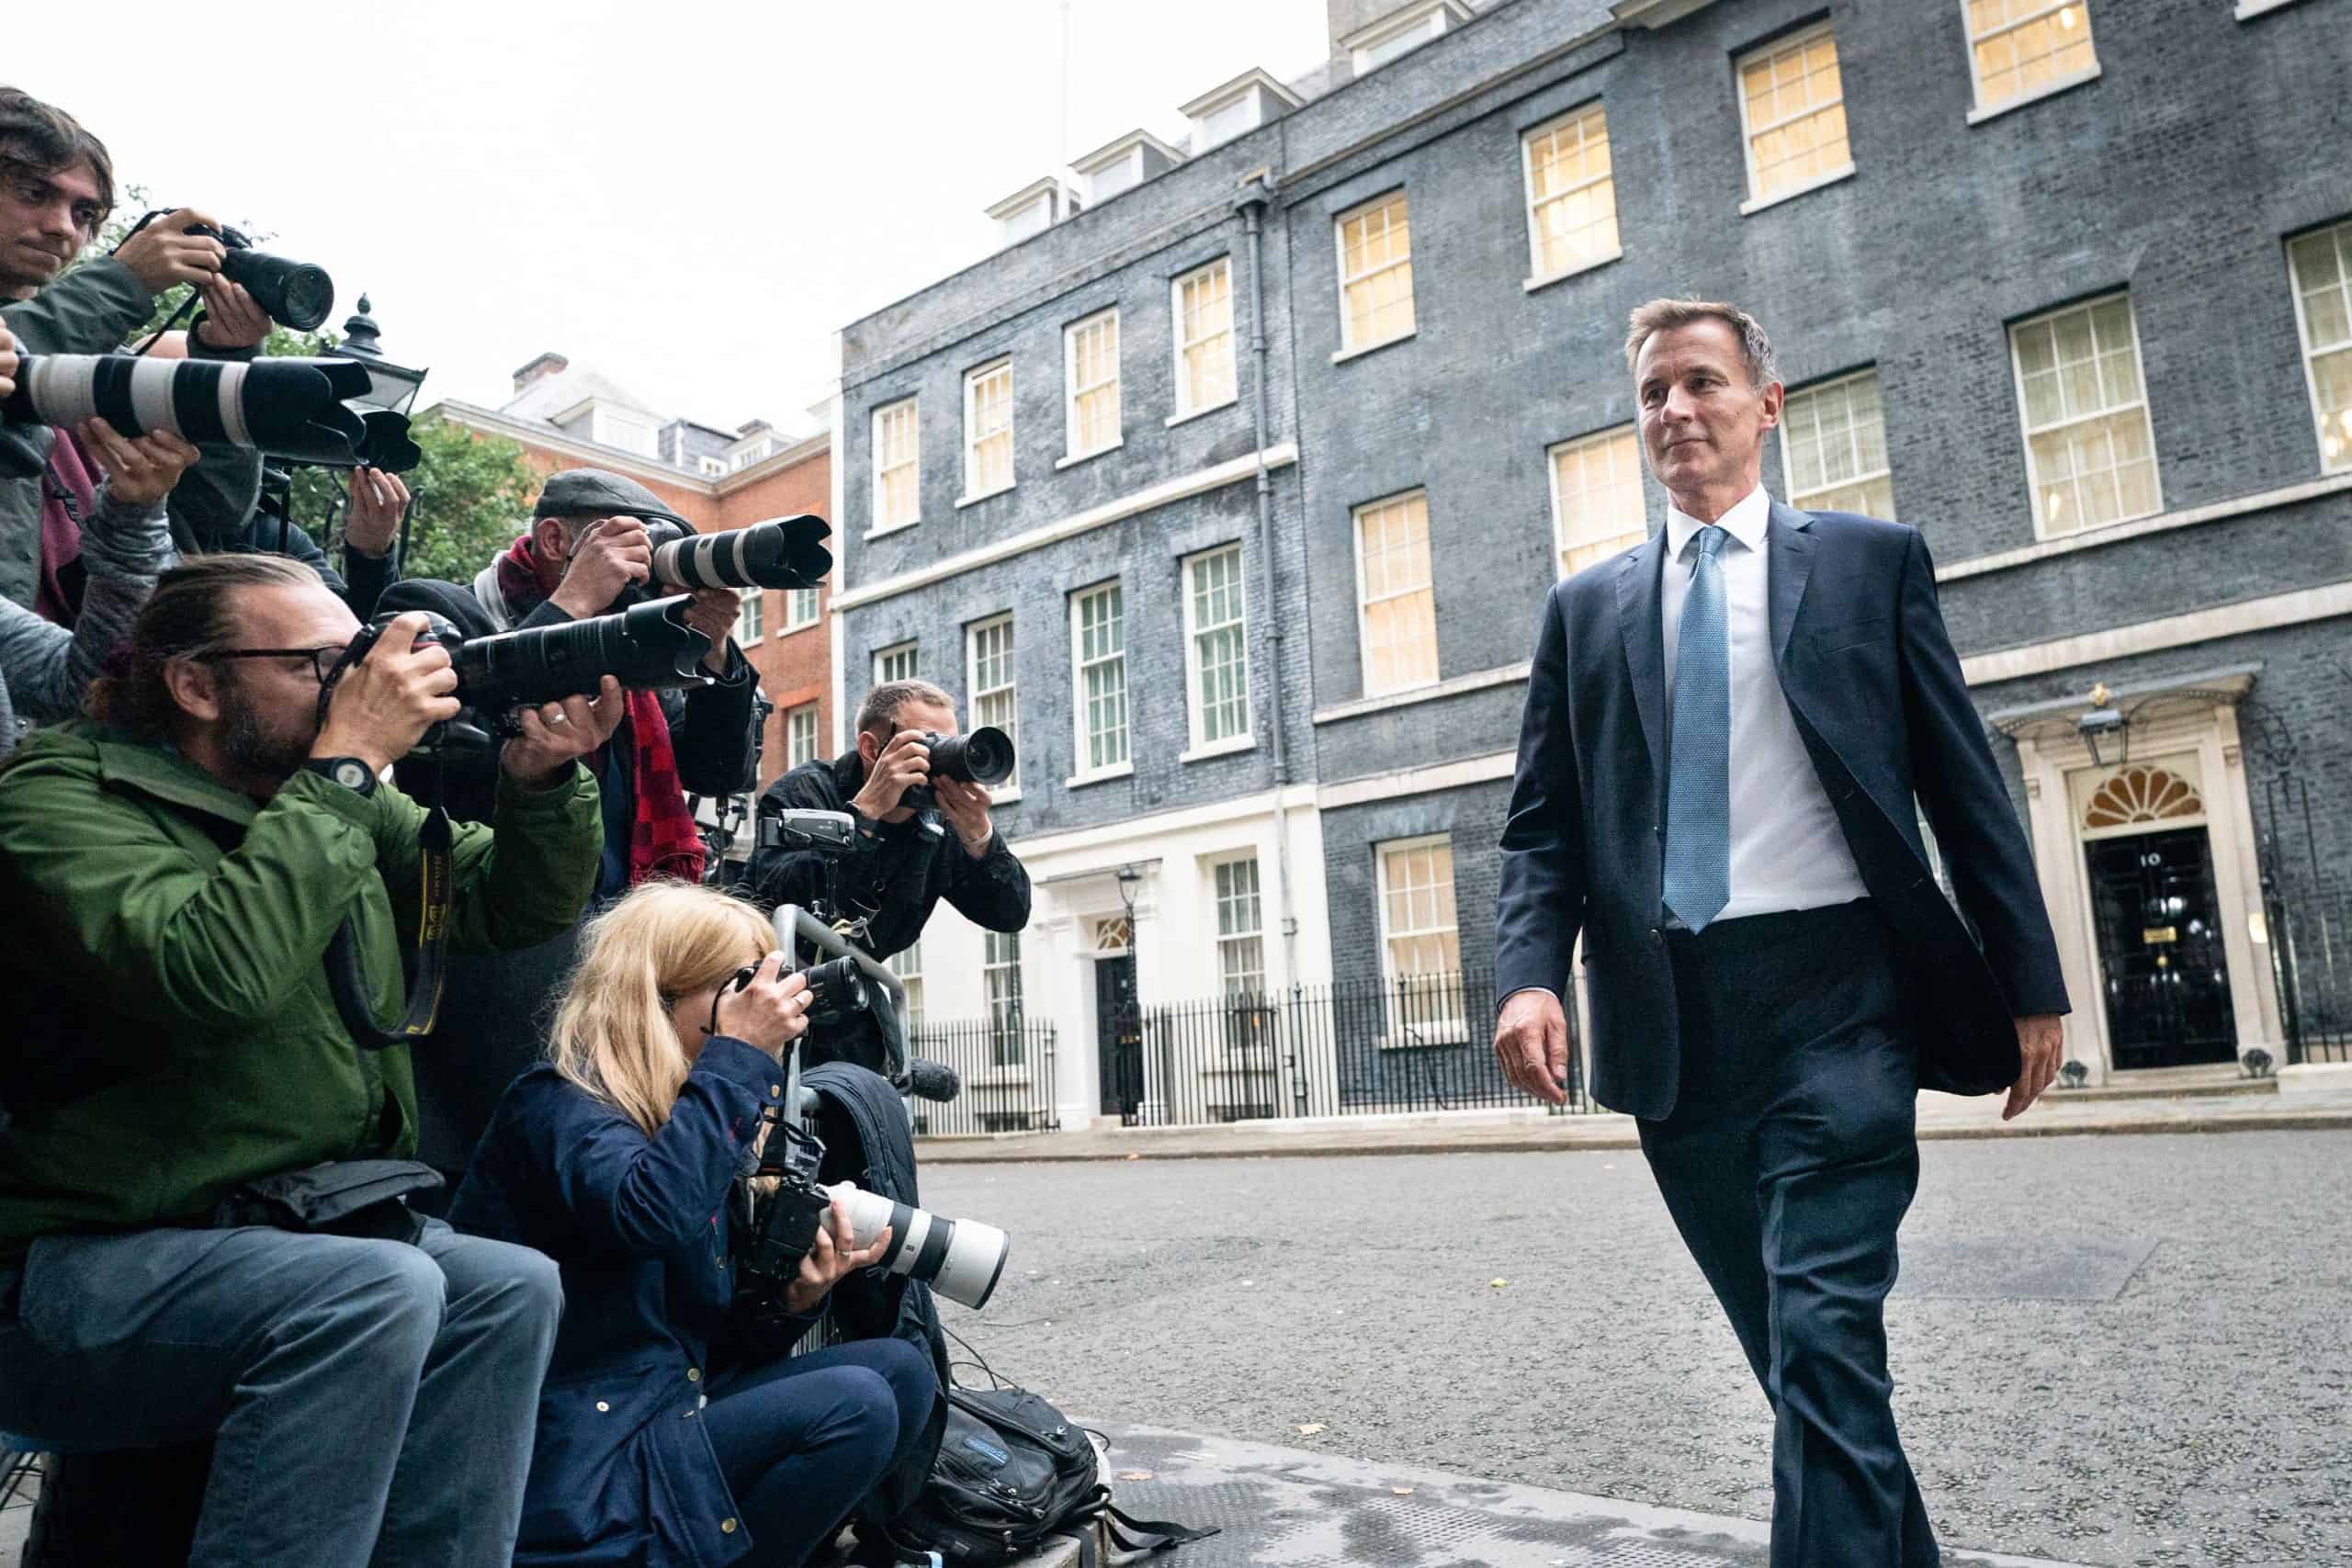 Hunt expected to delay spending cuts until after next election